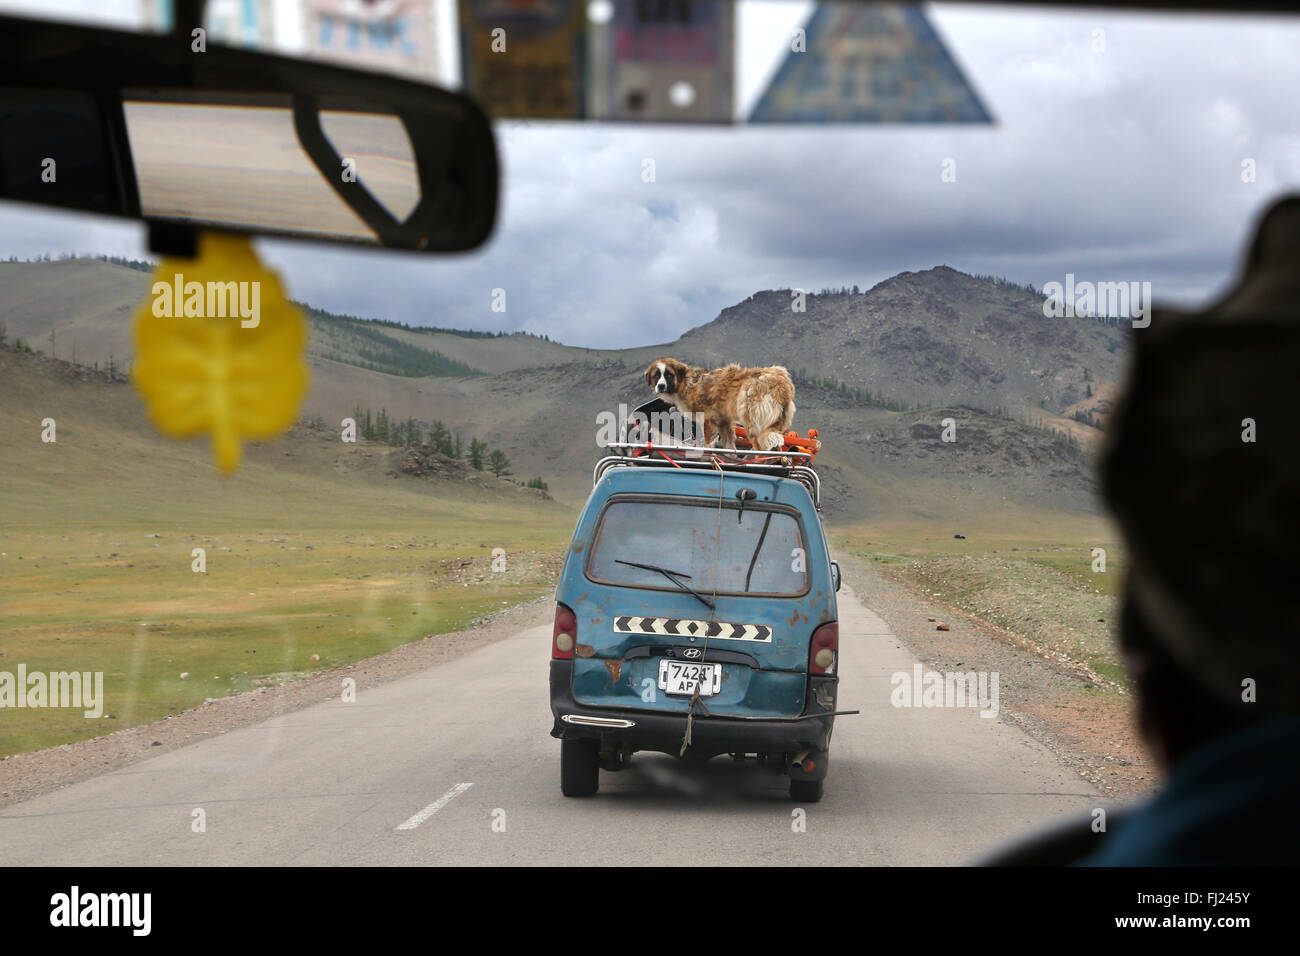 Dog transported on a car in Mongolia Stock Photo